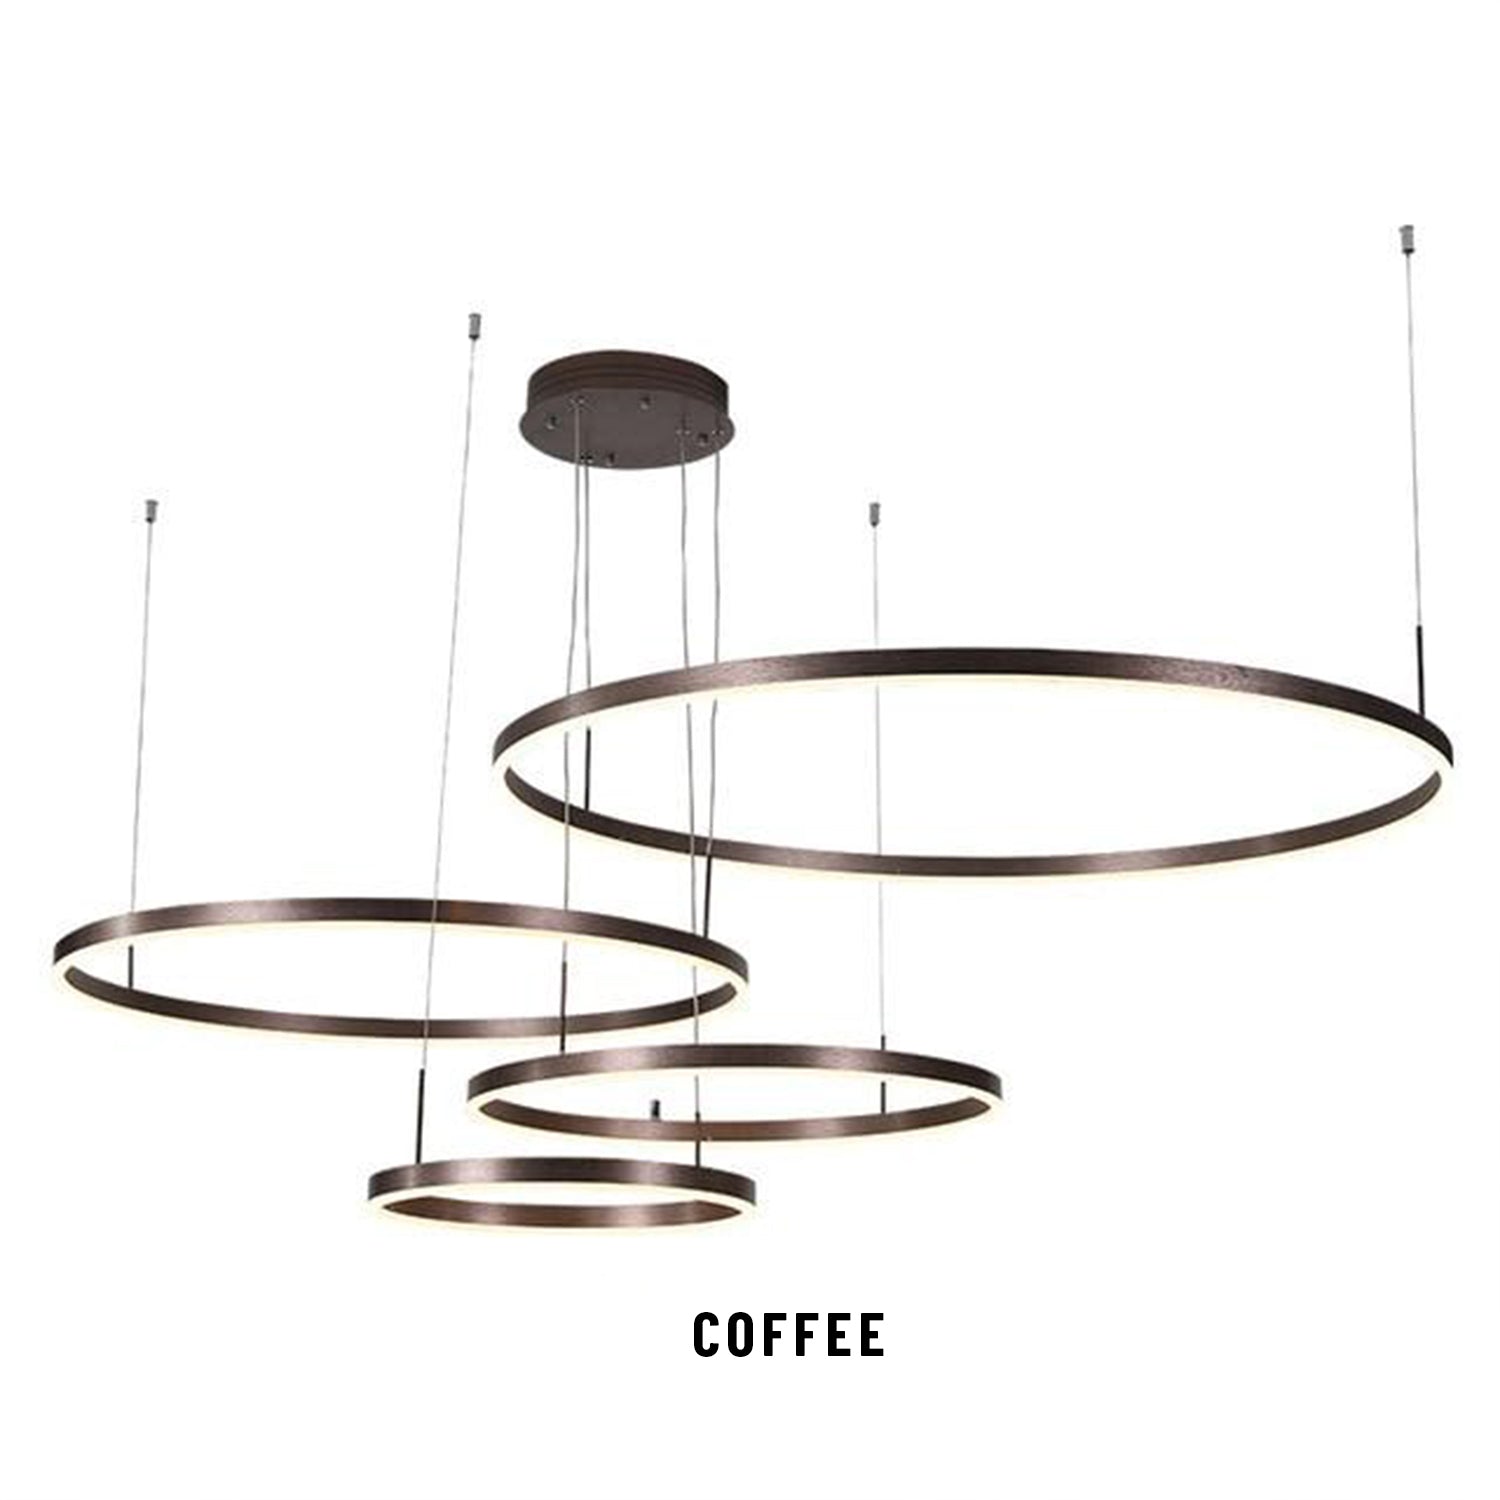 Circle Rings Acrylic | Aluminum Chandeliers - Coffee / 4R 30 40 60 80cm / Remote dimming - Level Decor